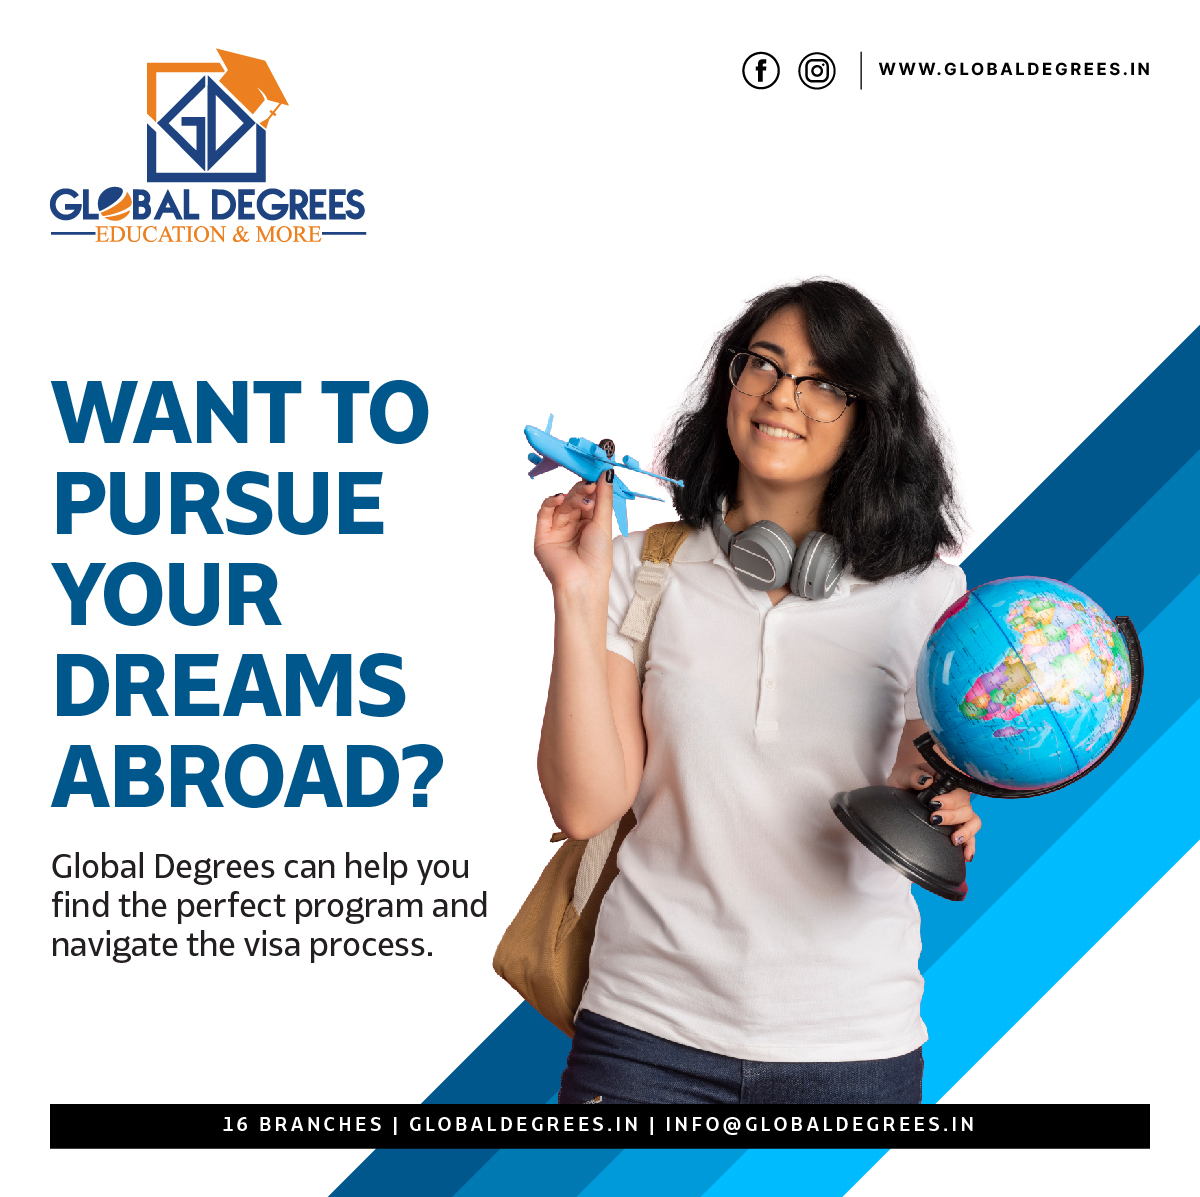 For all of your visa requirements, go no further than Global Degrees. 
we are here to help students and parents navigate the study abroad process.

#globaldegreesupport #studyabroadmadeeasy #visaneeds #hasslefreeexperience #reliablepartners #visaprocessmadeeasy #studyabroaddreams